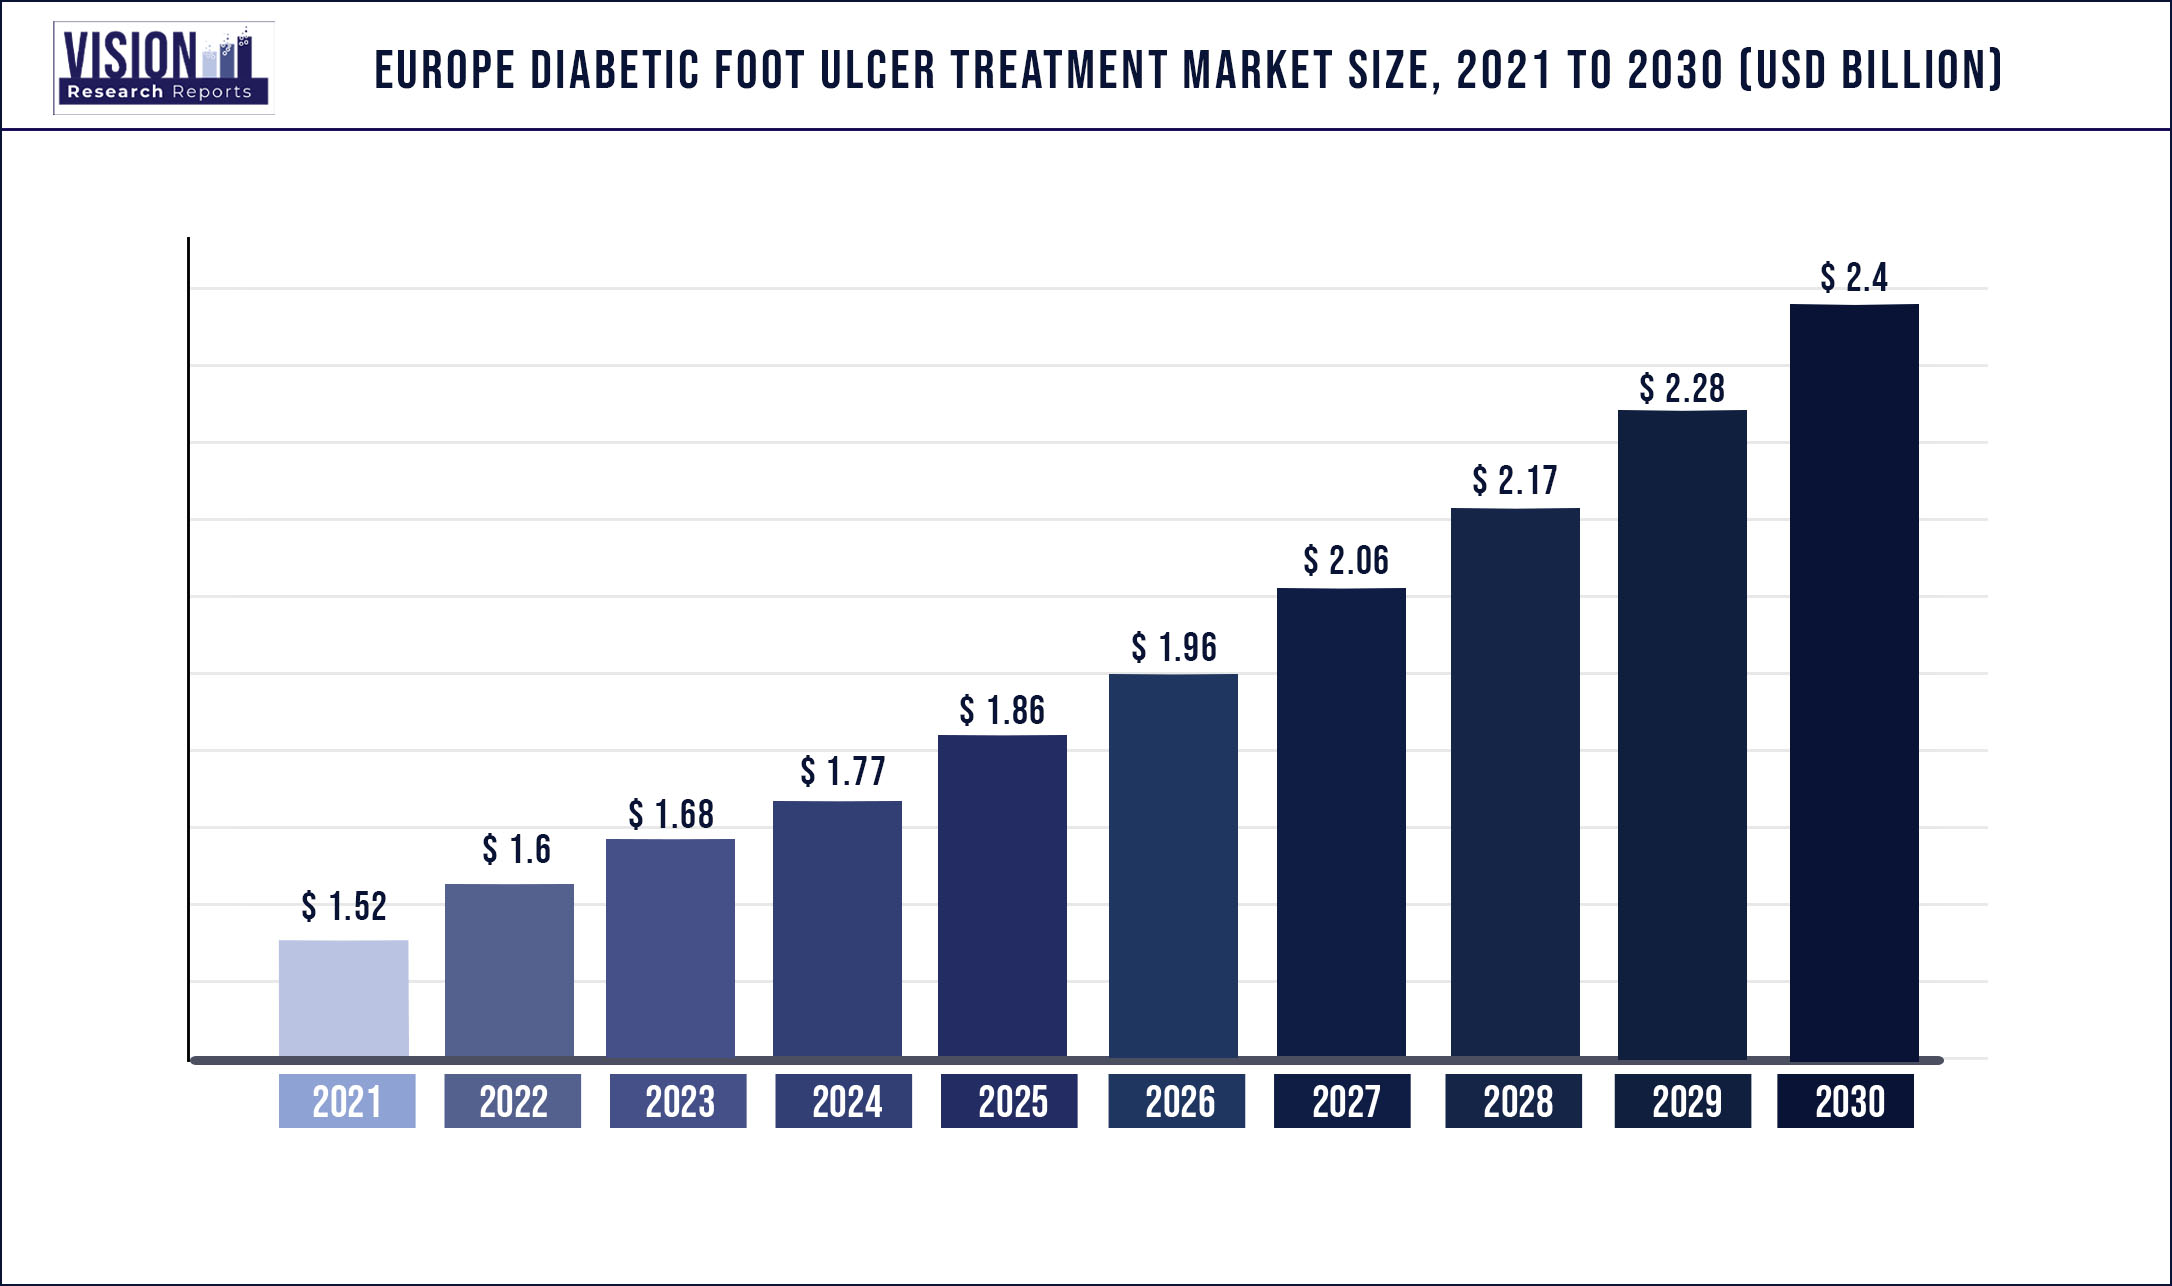 Europe Diabetic Foot Ulcer Treatment Market Size 2021 to 2030